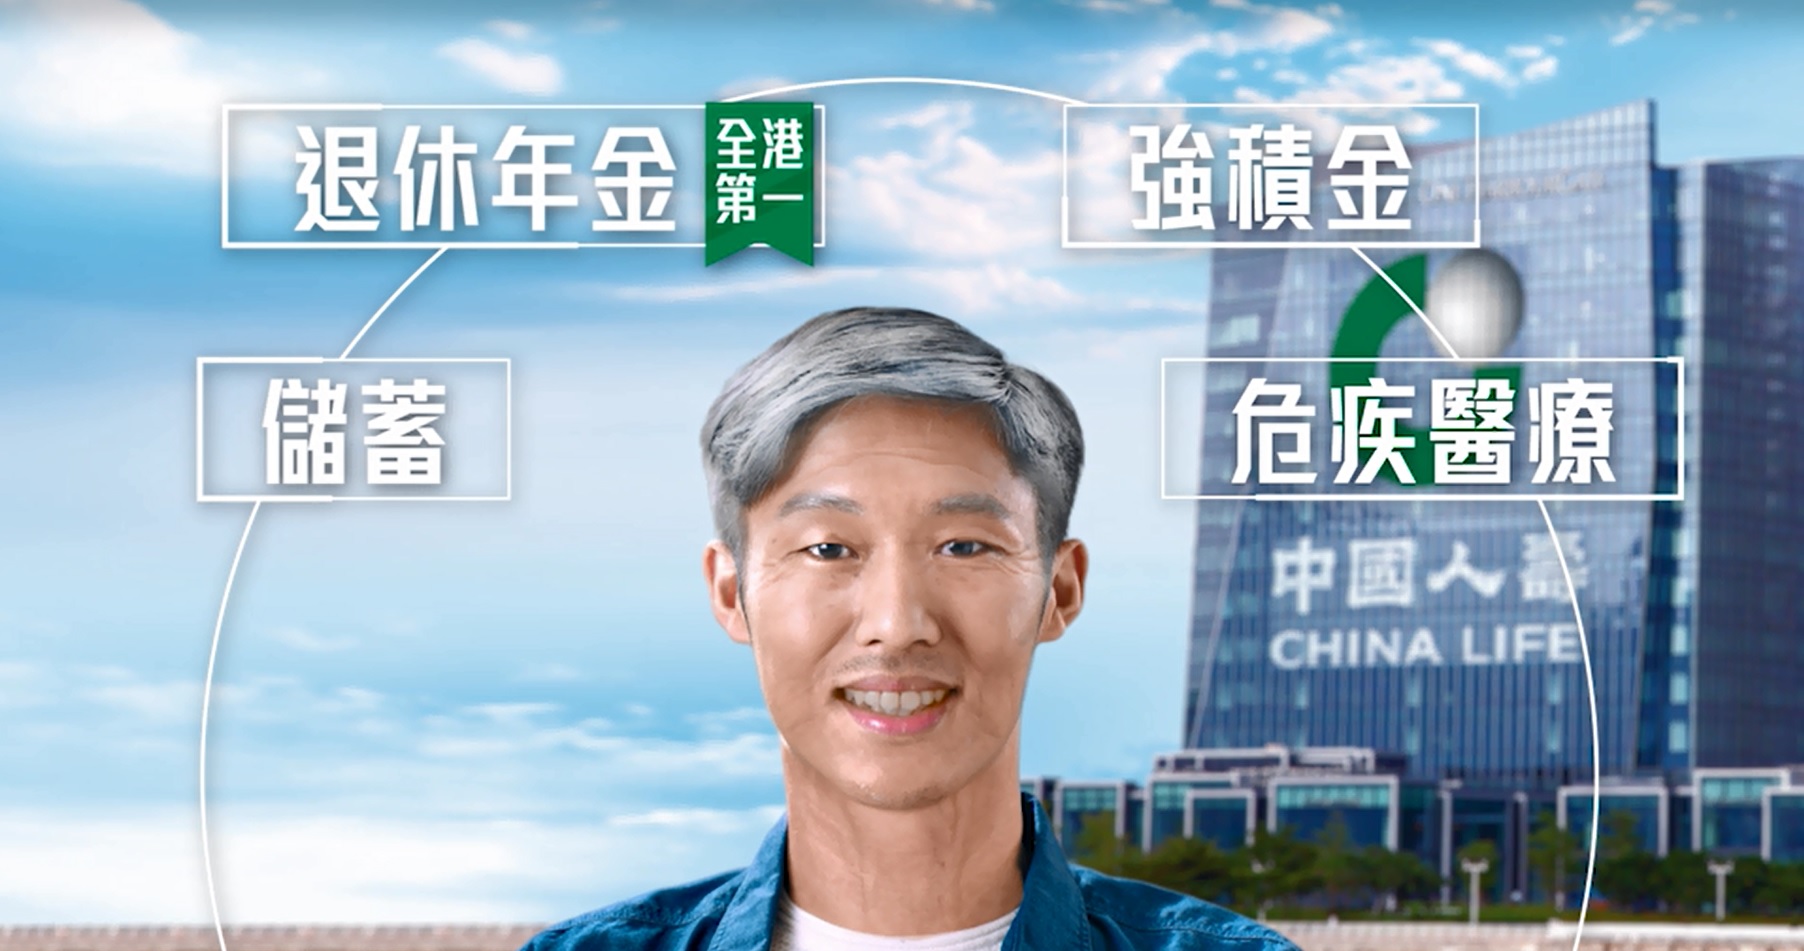 China Life (Overseas) launches “Change is constant. So is our promise.” New Television Ad Campaign